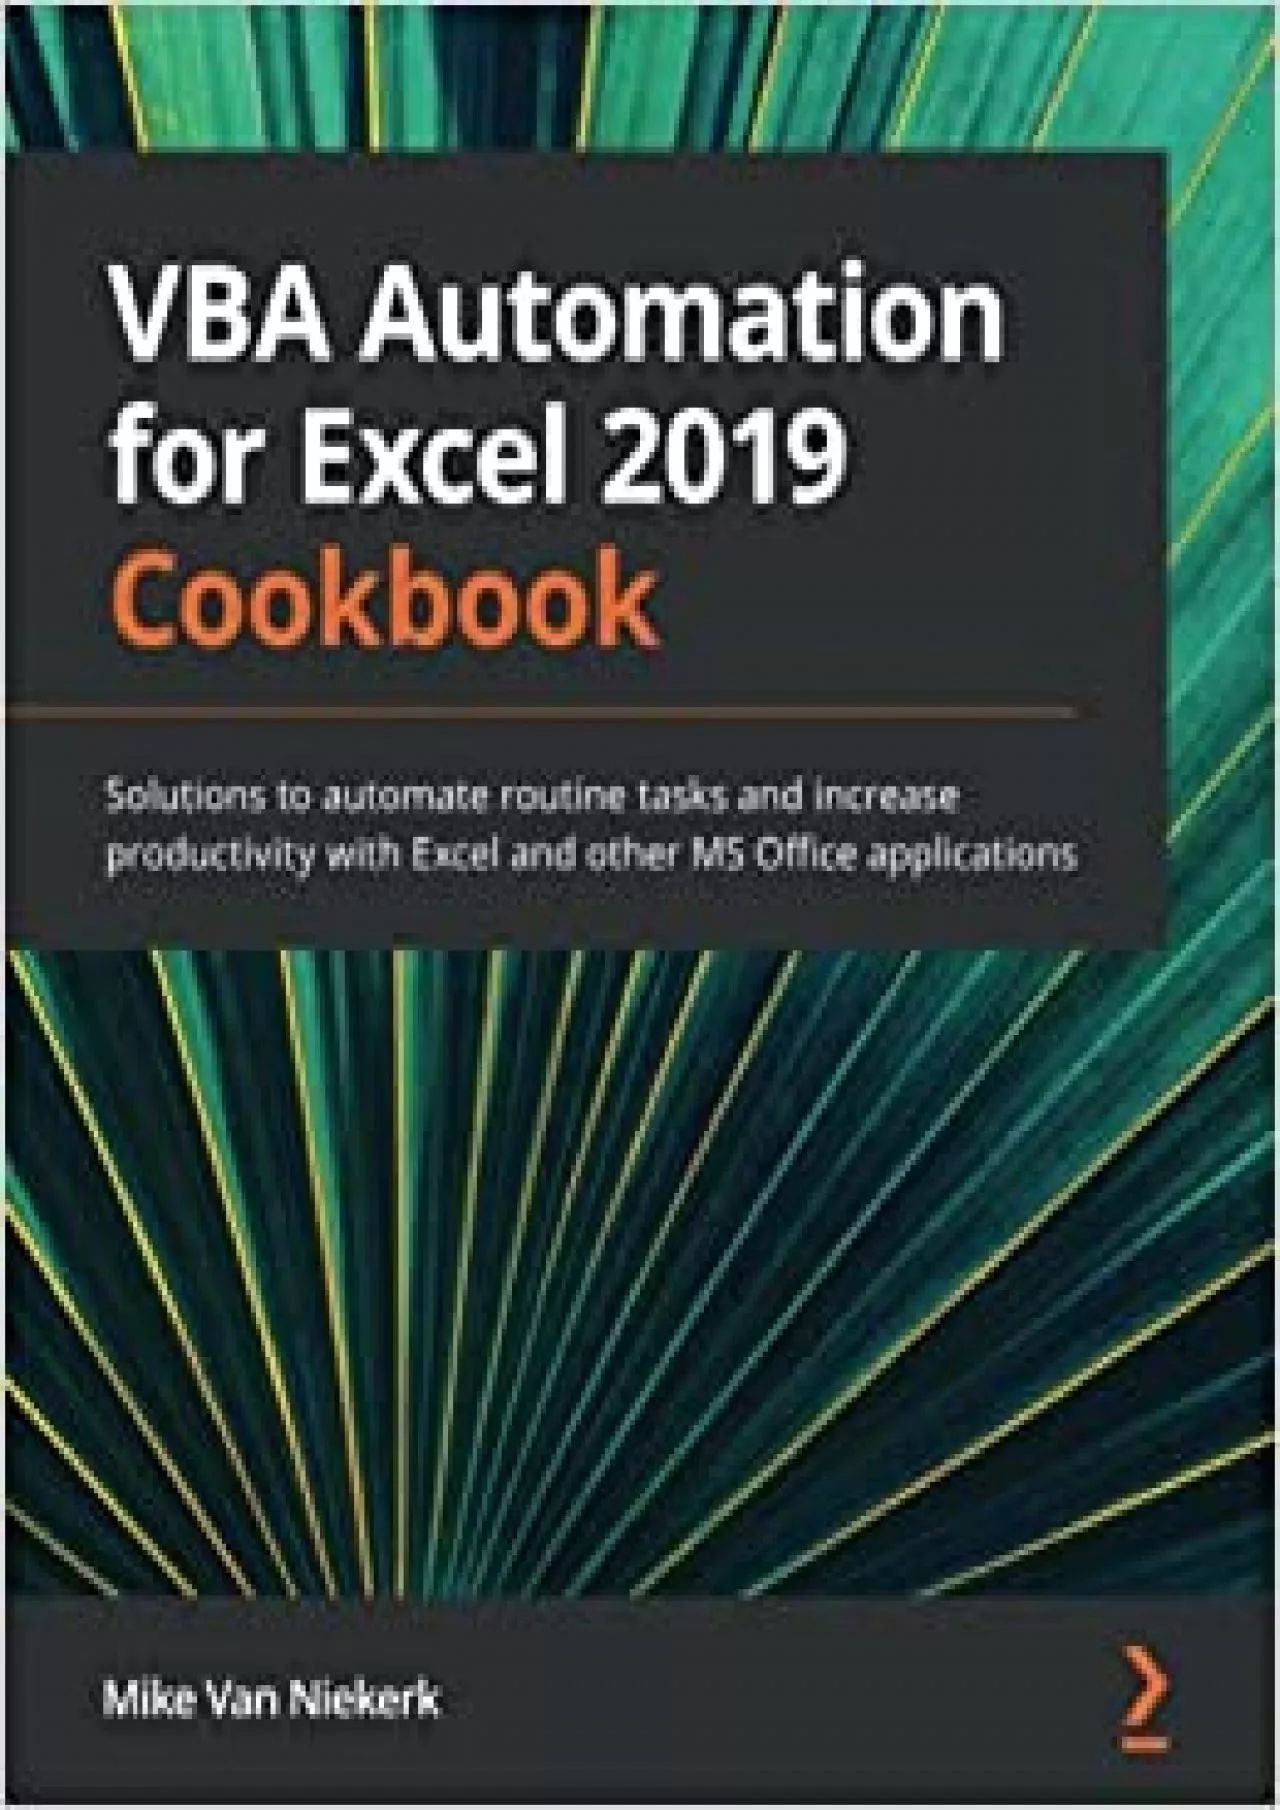 VBA Automation for Excel 2019 Cookbook: Solutions to automate routine tasks and increase